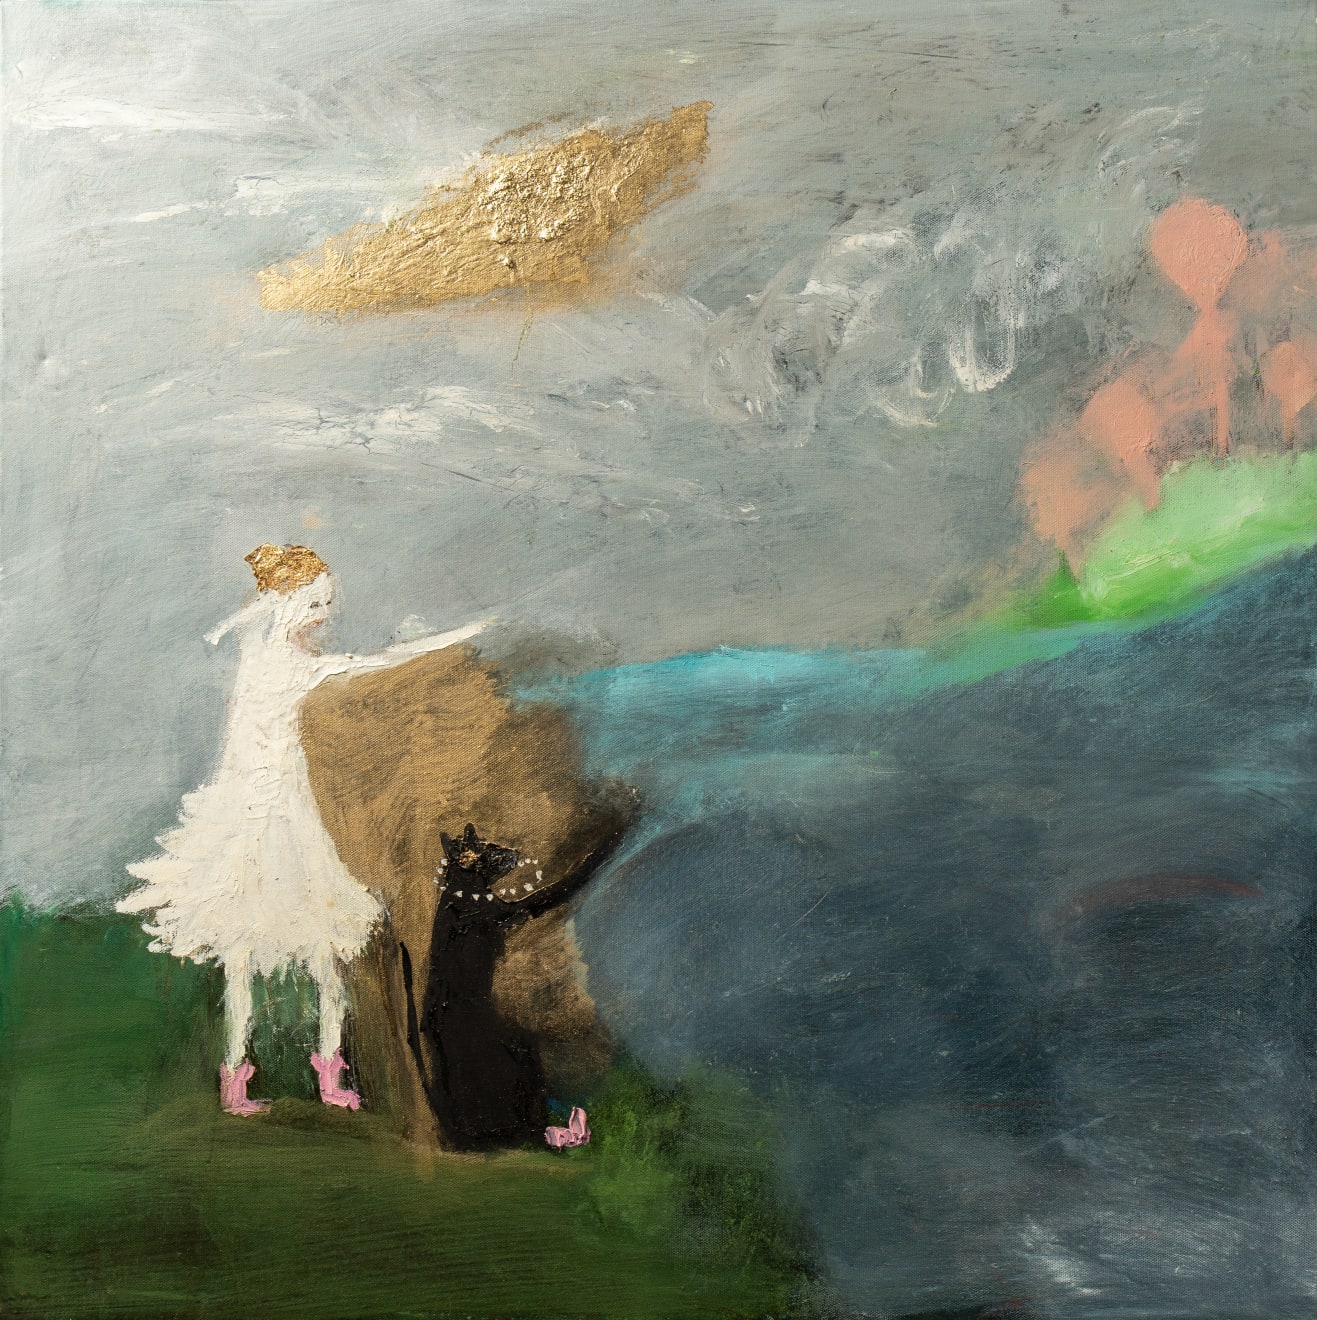 Winifred Wanders The World 05 Oil on Canvas Original 75 x 75 cm $3300 SOLD